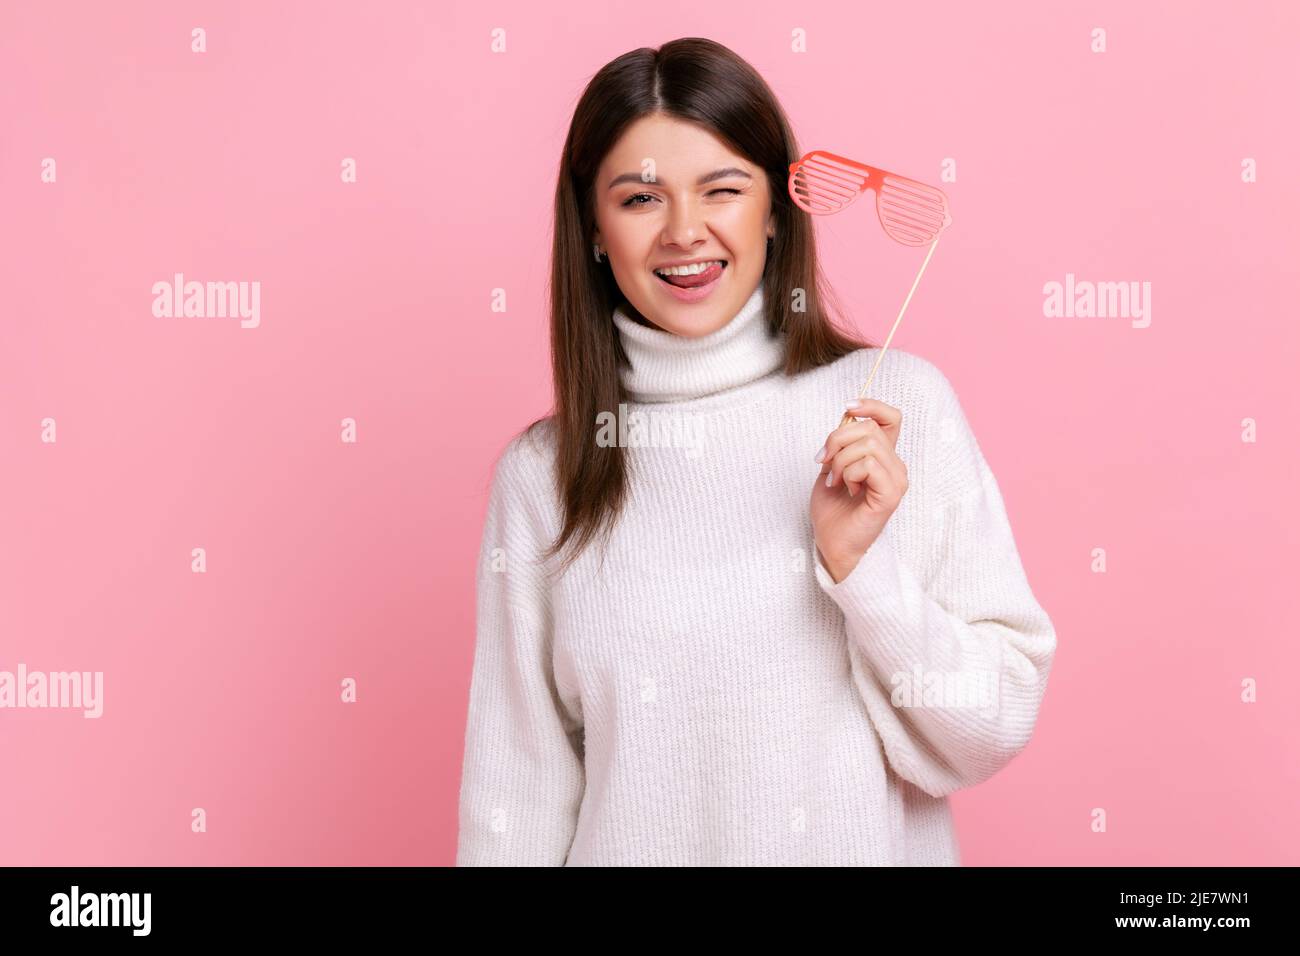 Happy playful girl looking at camera and winking, holding paper glasses, party props for celebration, wearing white casual style sweater. Indoor studio shot isolated on pink background. Stock Photo